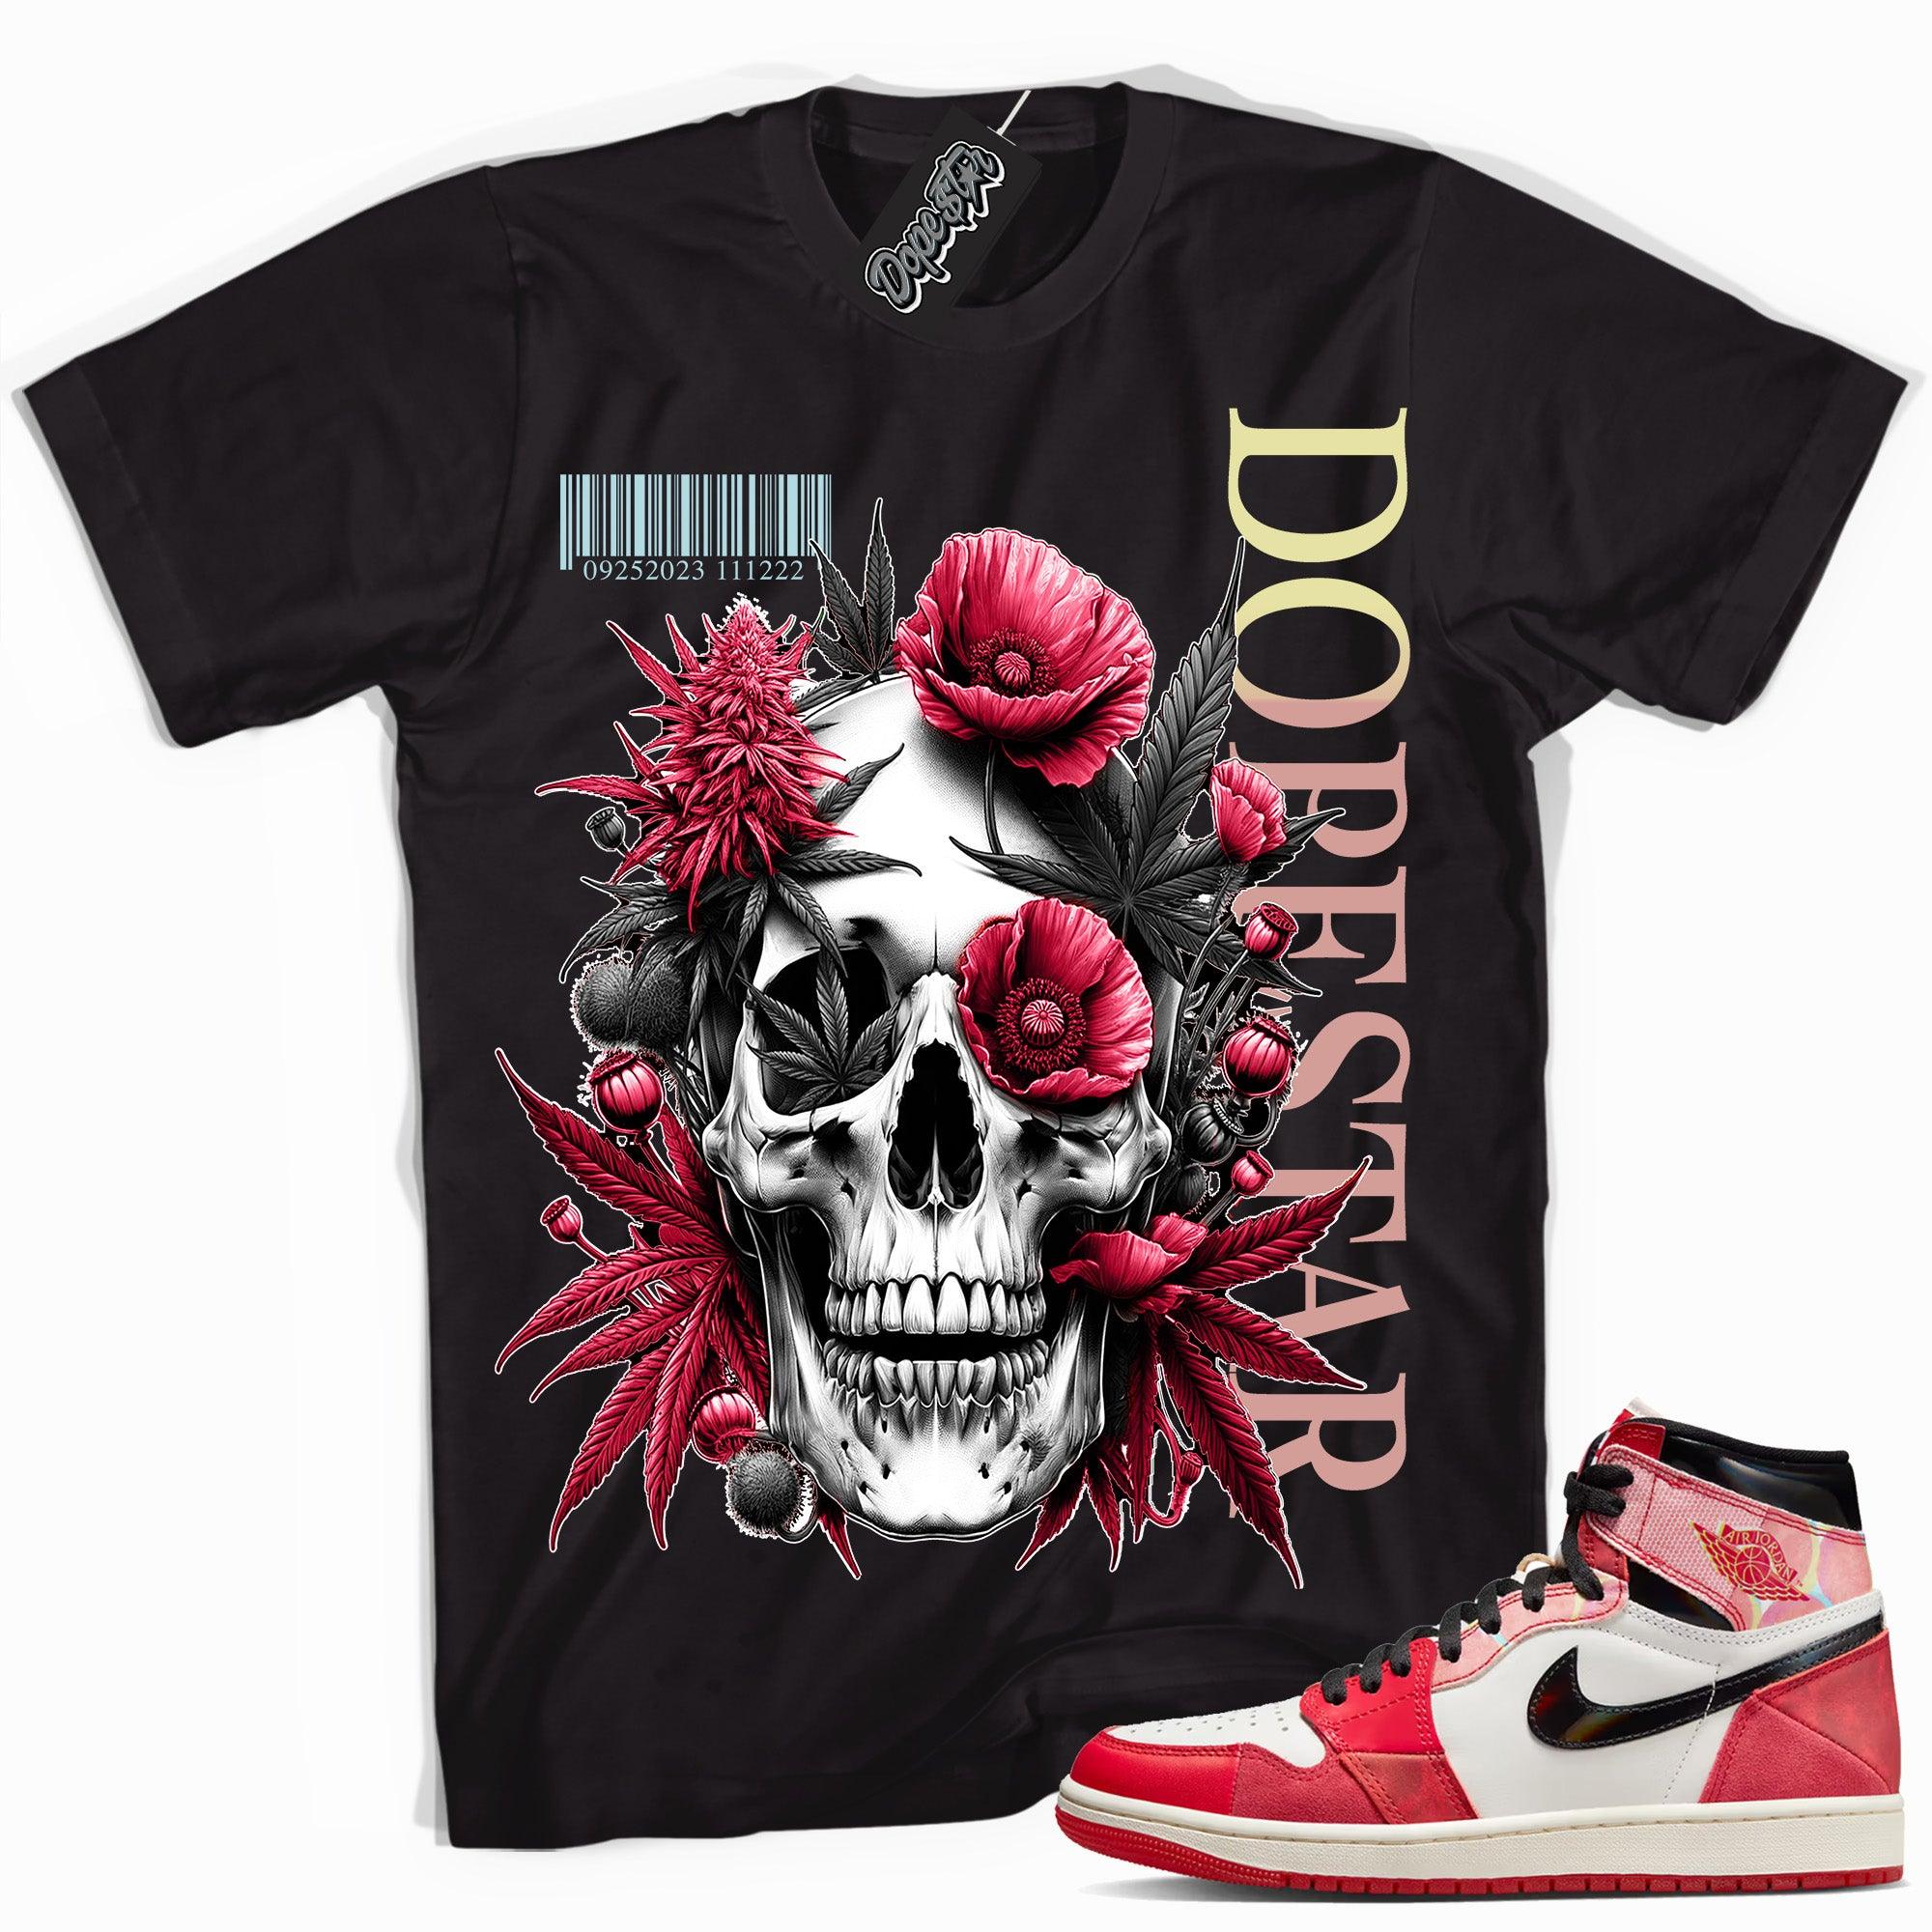 Cool Black graphic tee with “ Skull Cannabis Poppies ” print, that perfectly matches AIR JORDAN 1 Retro High OG NEXT CHAPTER SPIDER-VERSE  sneakers 